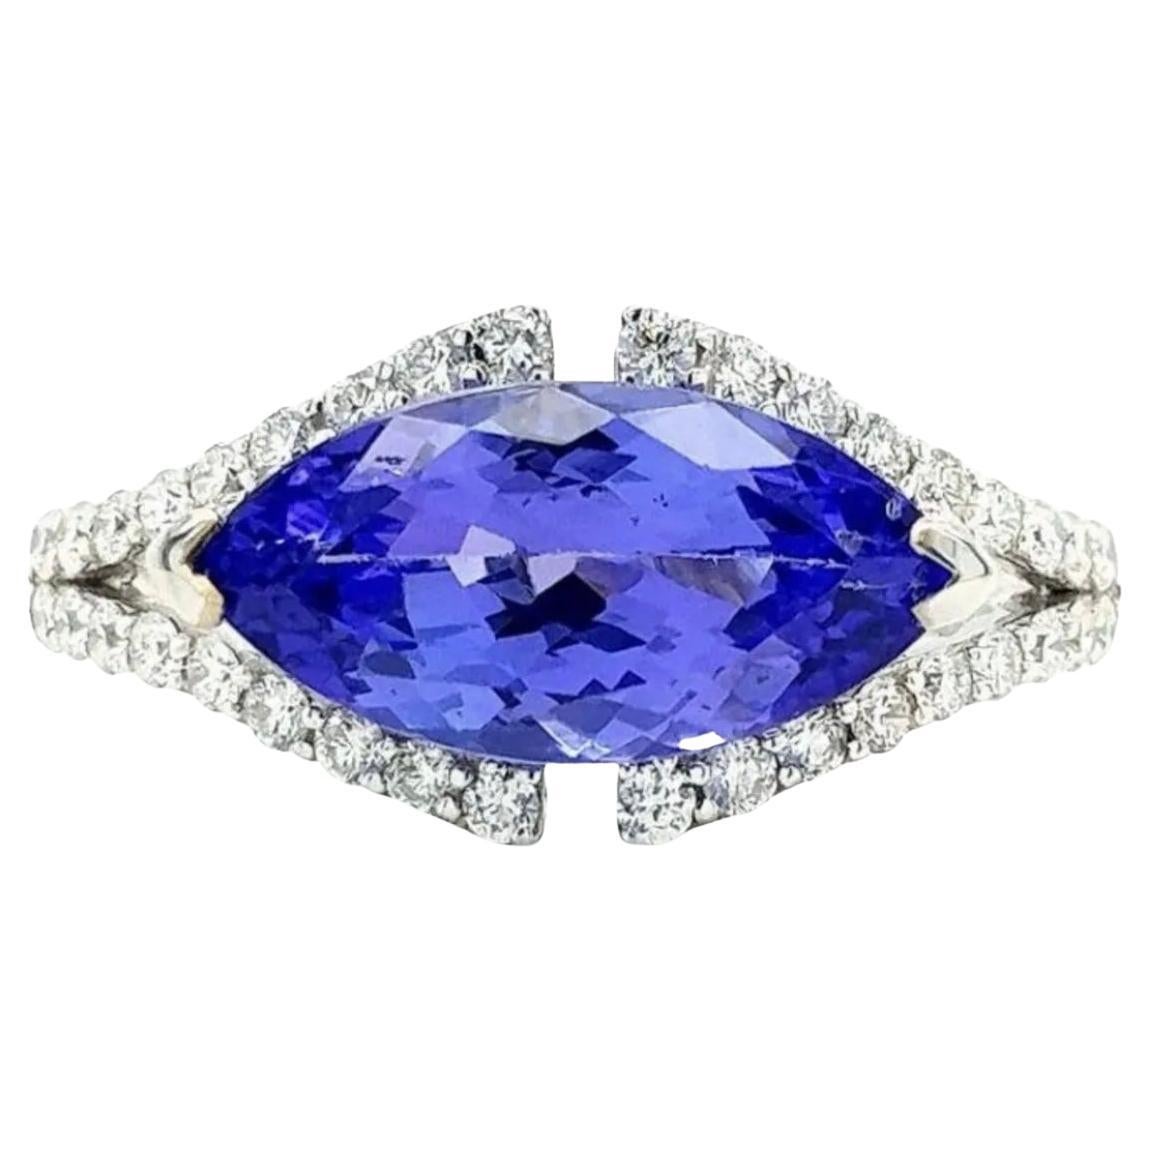 Authentic 18k 2.42 Ct Tanzanite & .39 Ct Diamond Ring with Appraisal Report Inc For Sale